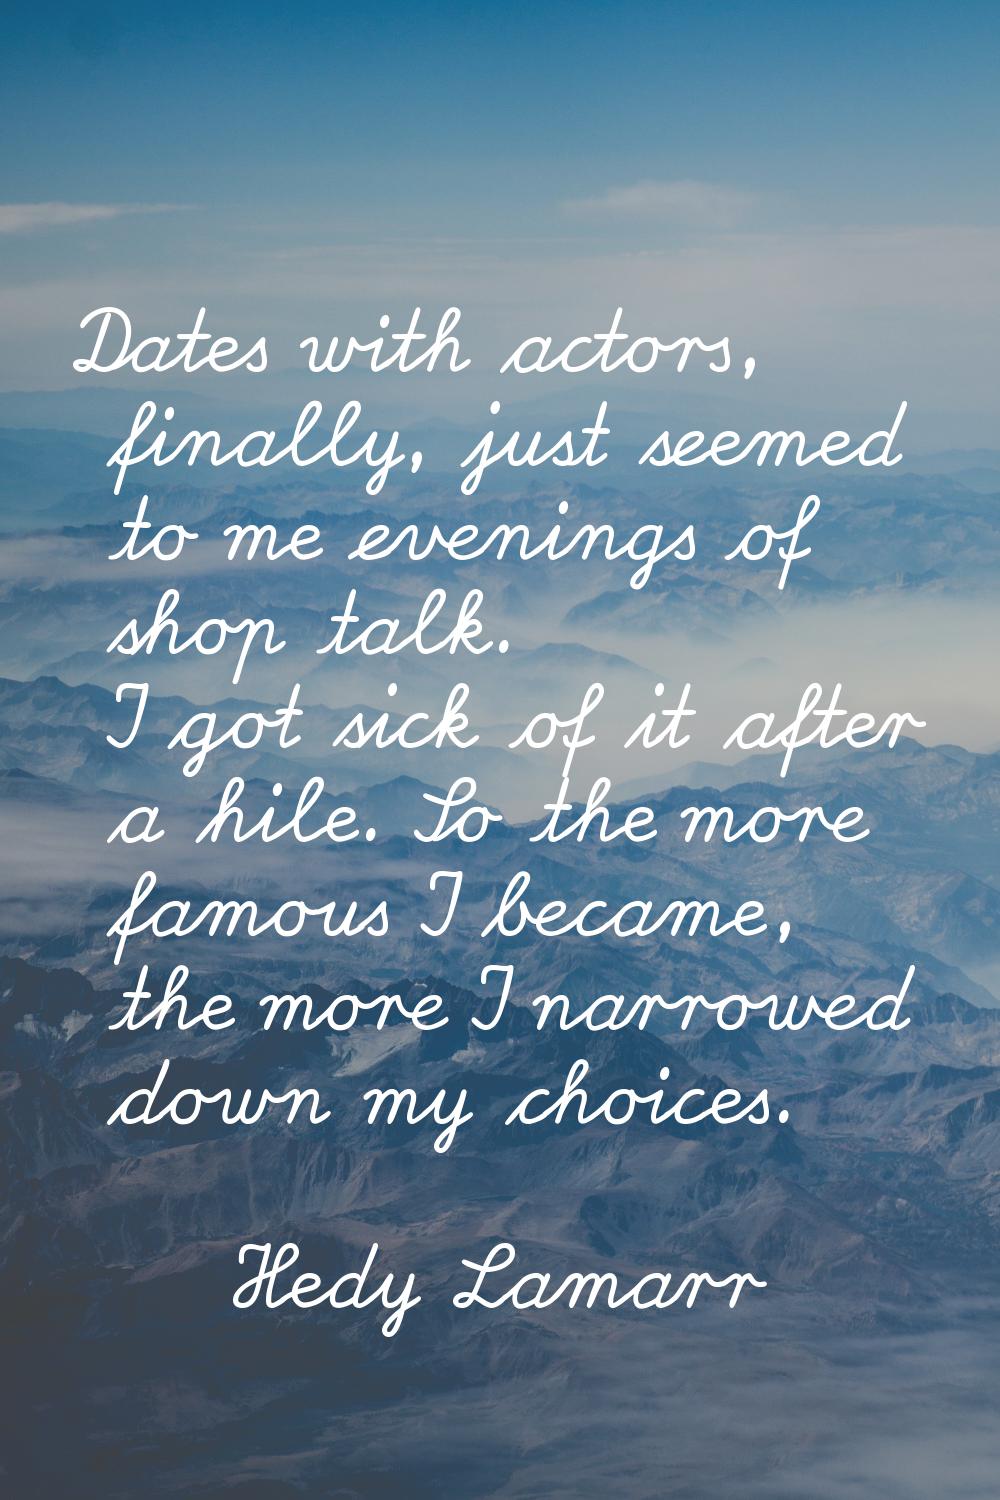 Dates with actors, finally, just seemed to me evenings of shop talk. I got sick of it after a hile.